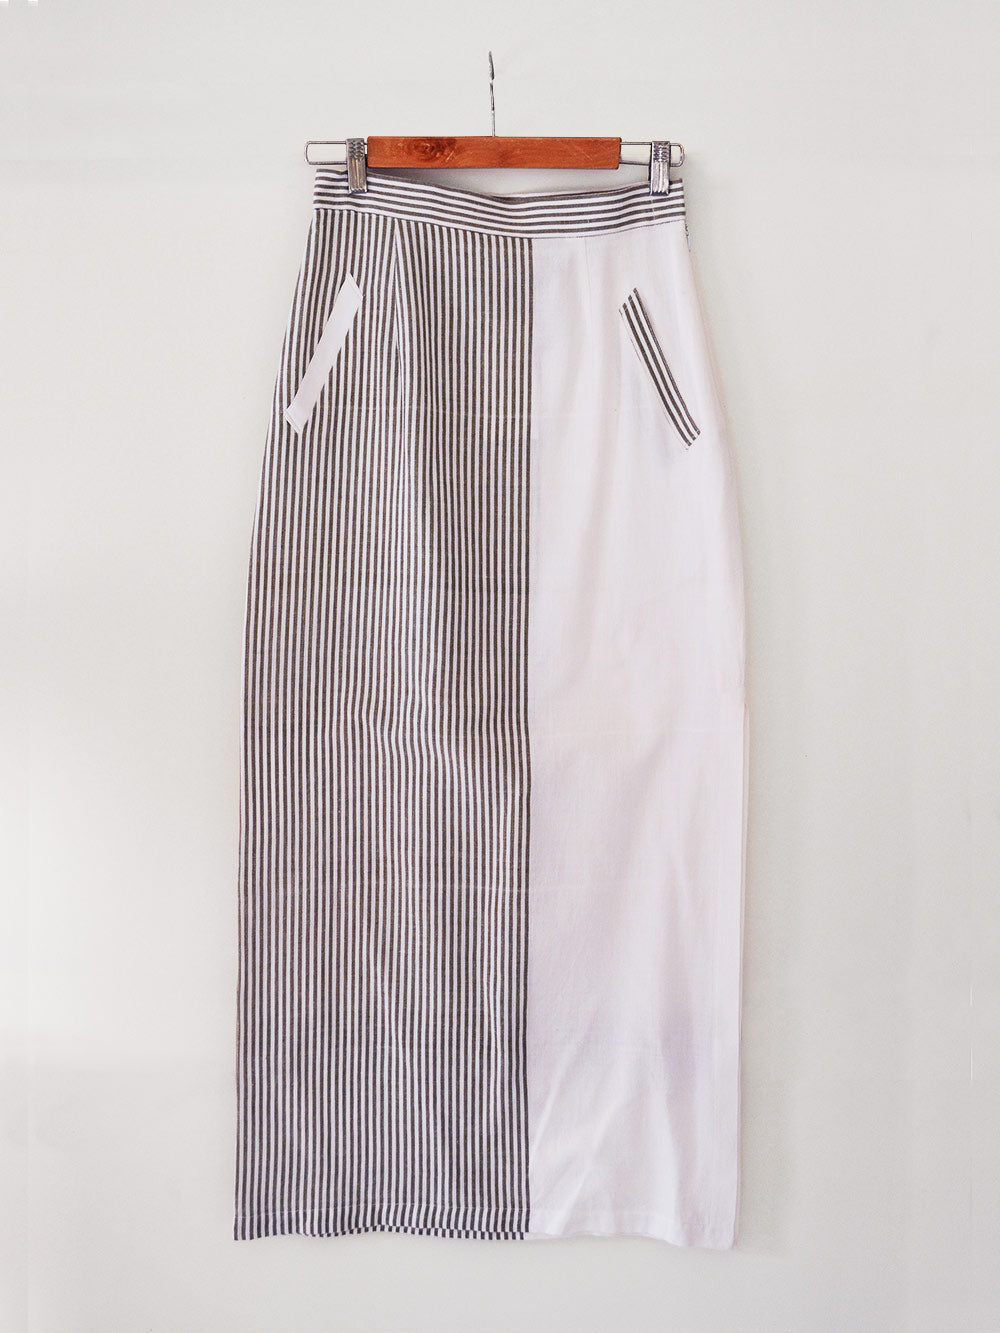 Striped Maxi Skirt with slit on the side made from 100% pure handwoven cotton, designed by Khumanthem Atelier